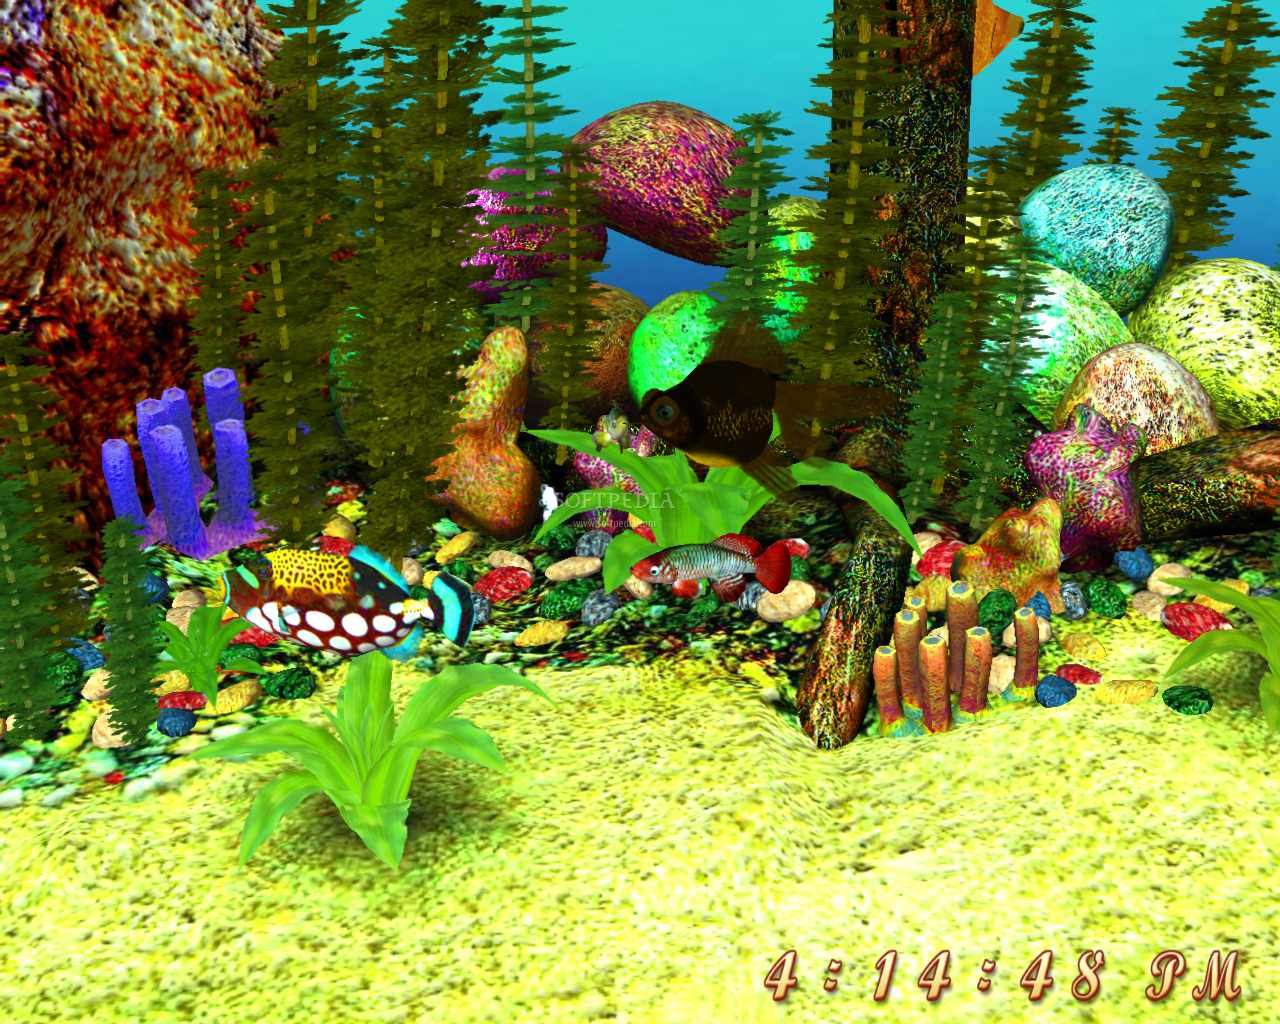 Aquarium Screensaver This Is The Image Displayed By 3d